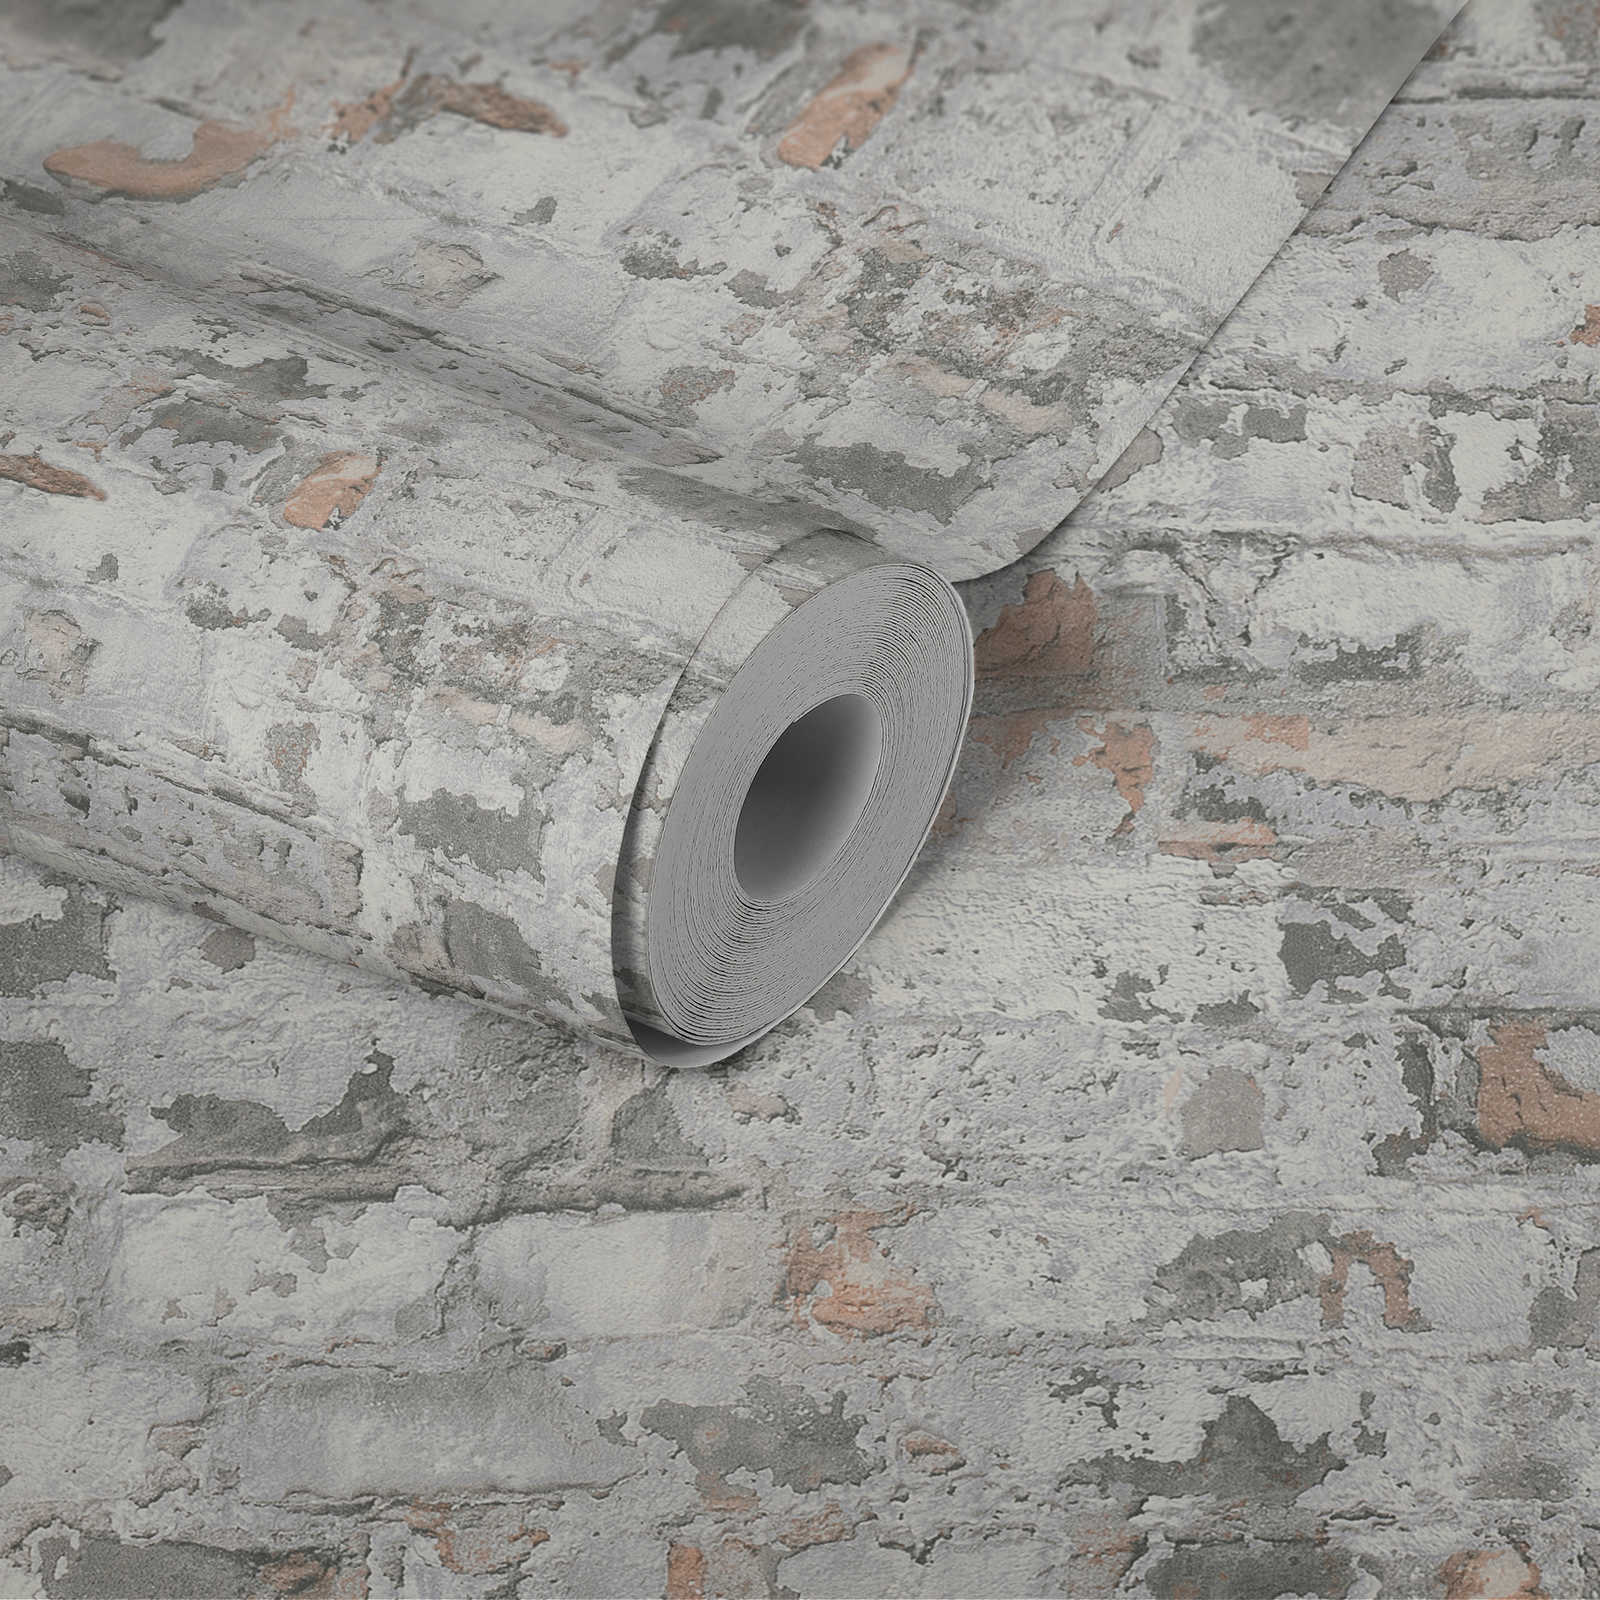             Rustic wall wallpaper with bricks in used design - grey, white
        